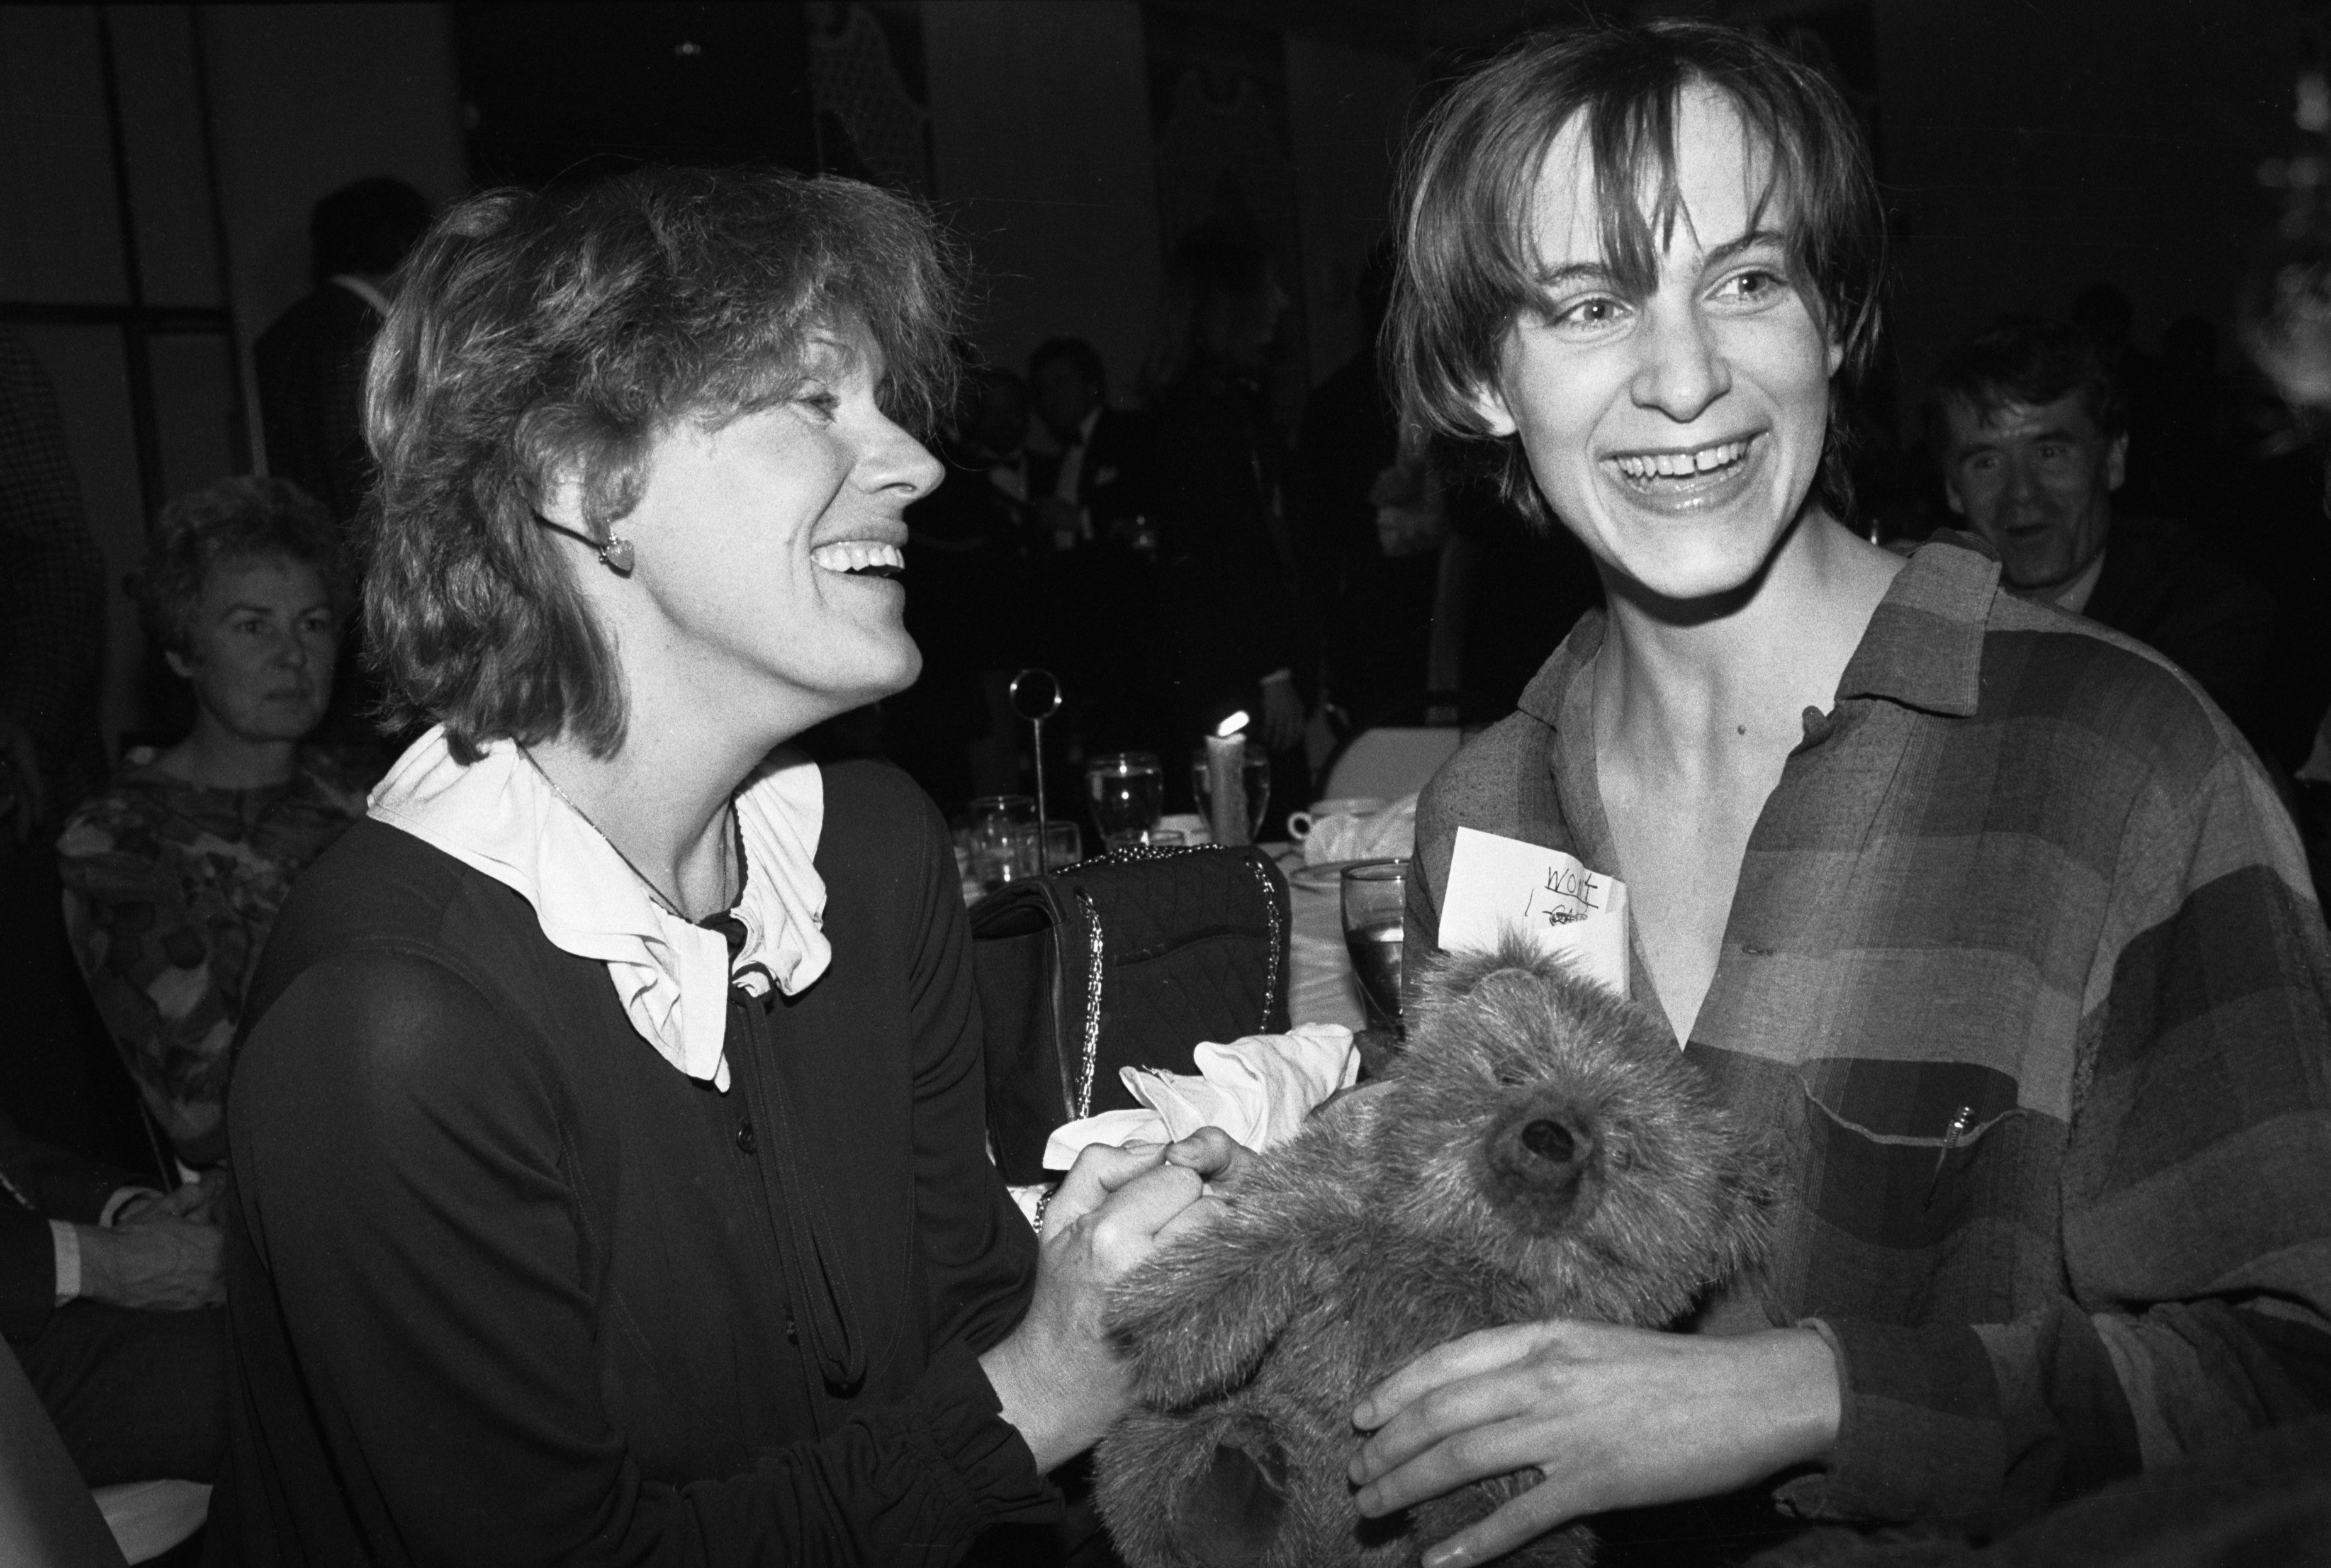 Tammy Grimes is pictured with her daughter, Amanda Plummer, at a party following the opening of "Agnes of God" at an undisclosed location and date | Source: Getty Images